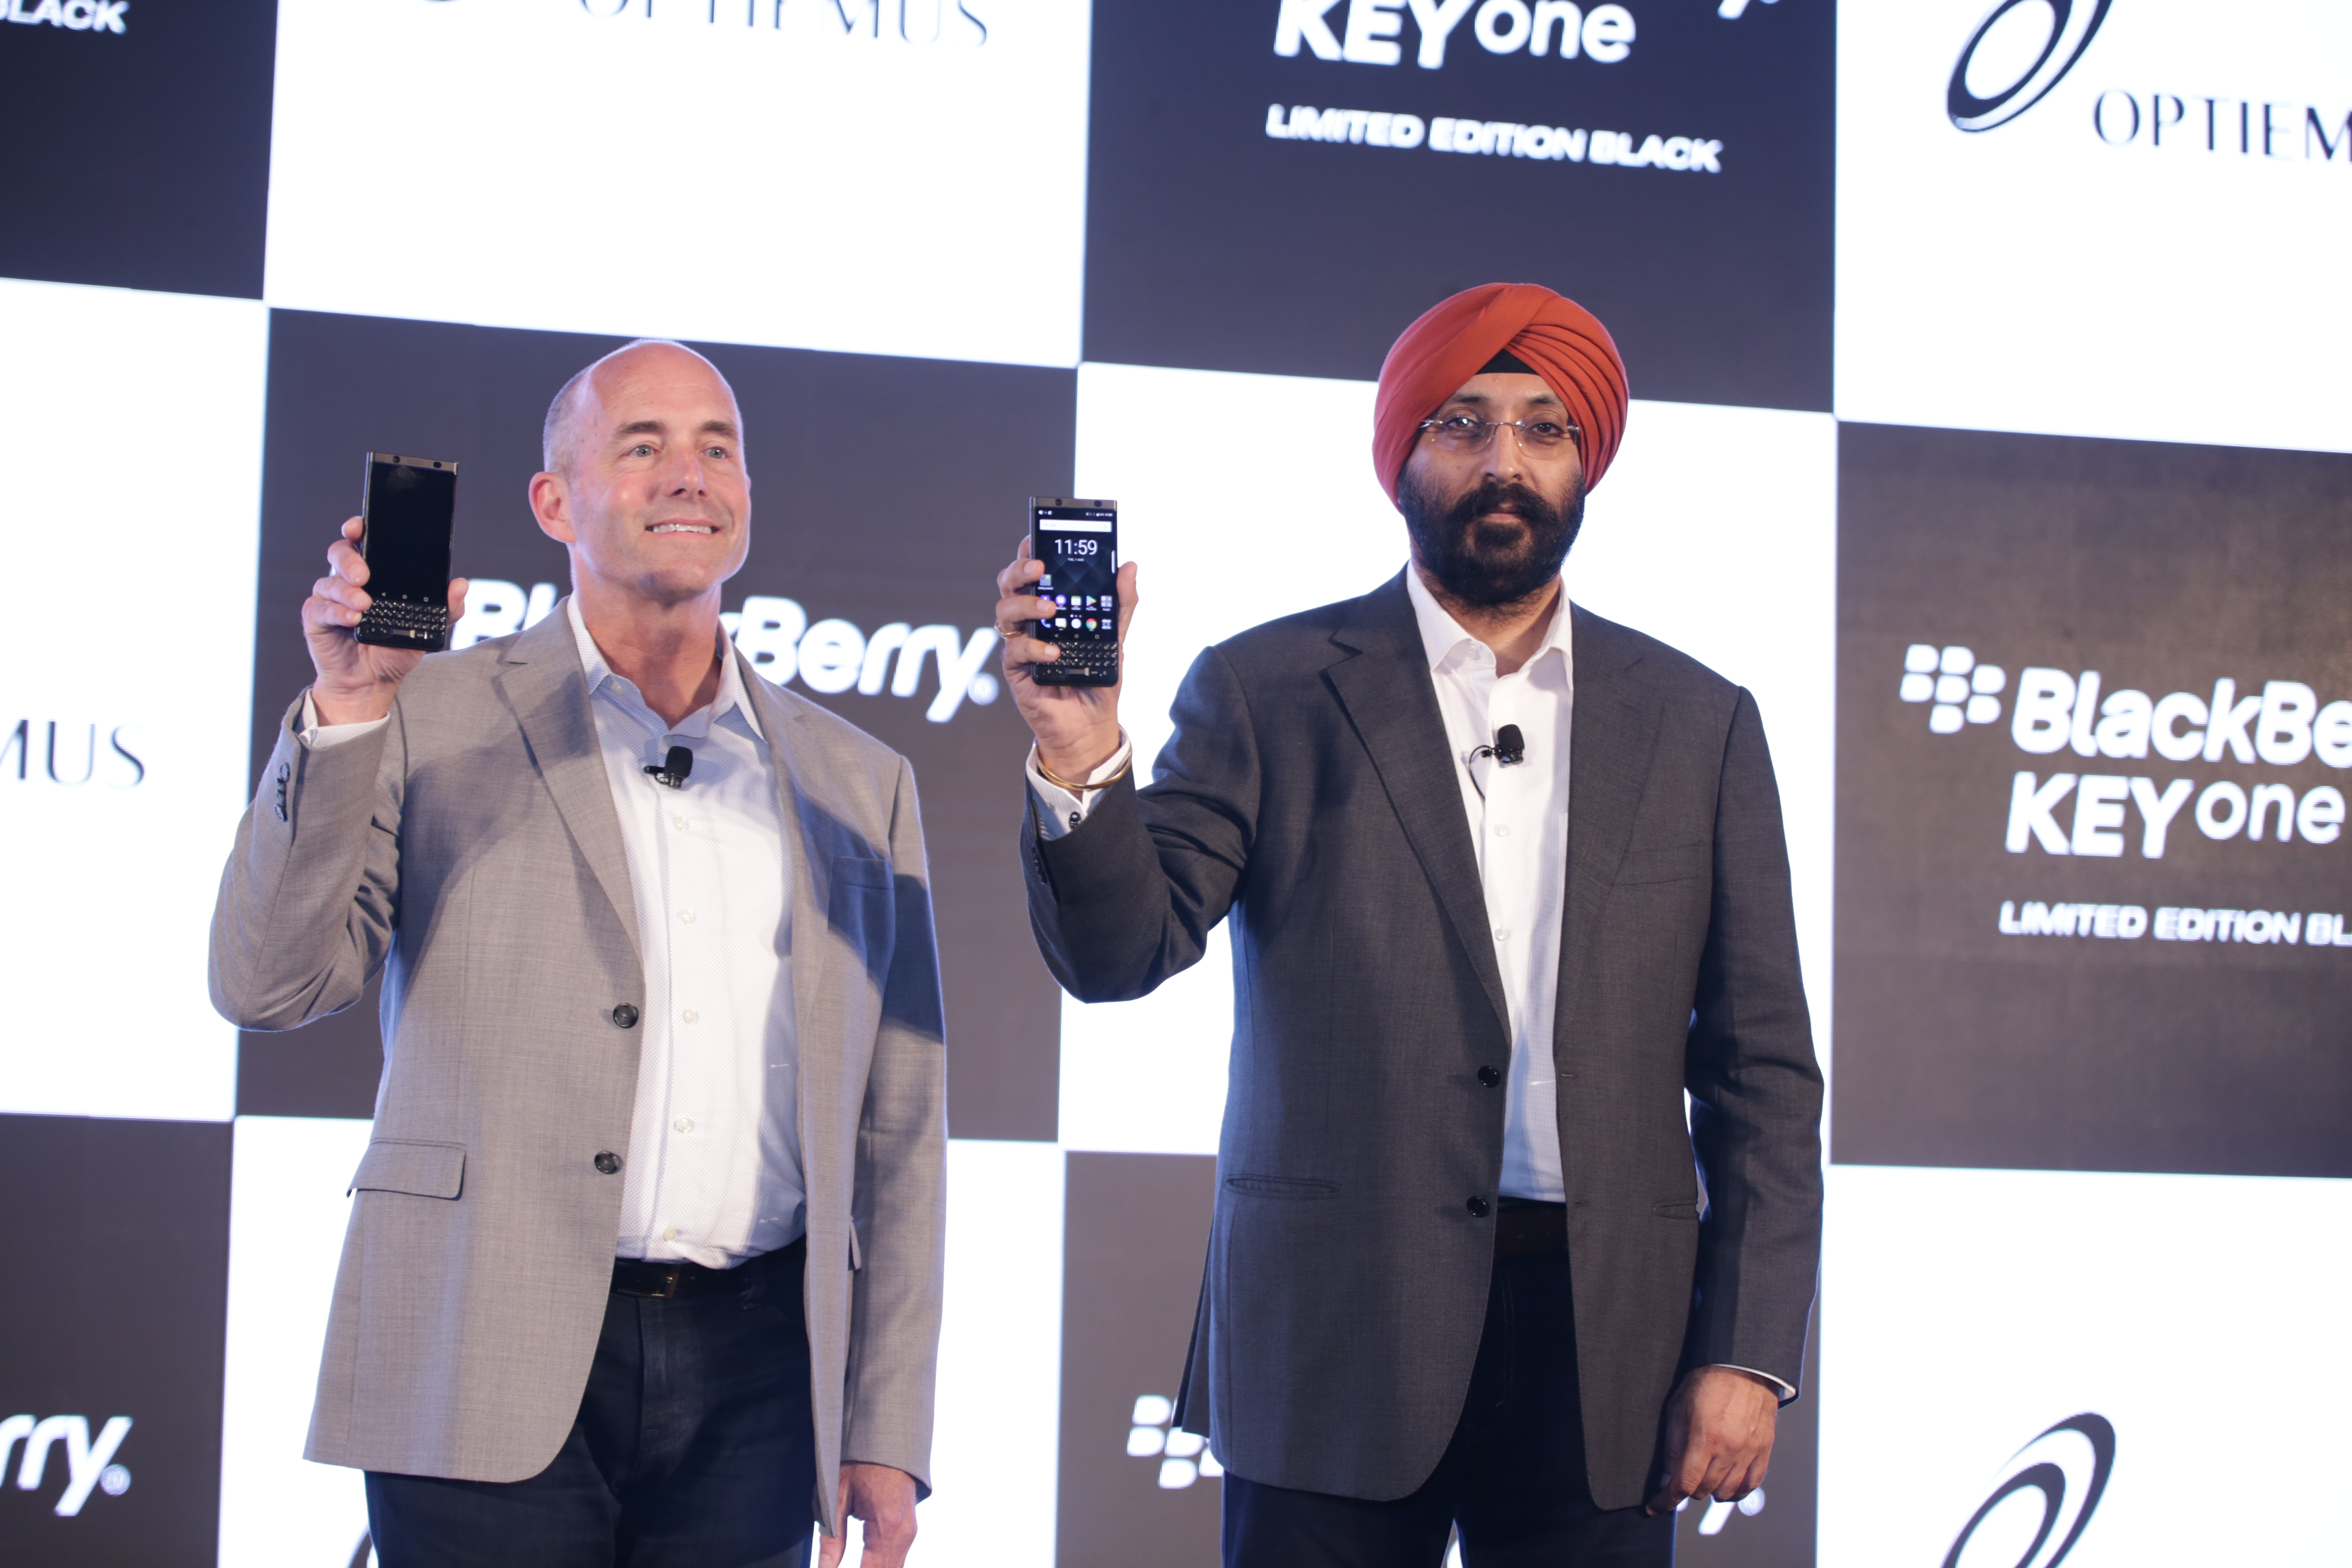 Blackberry KEYone launched in India 1